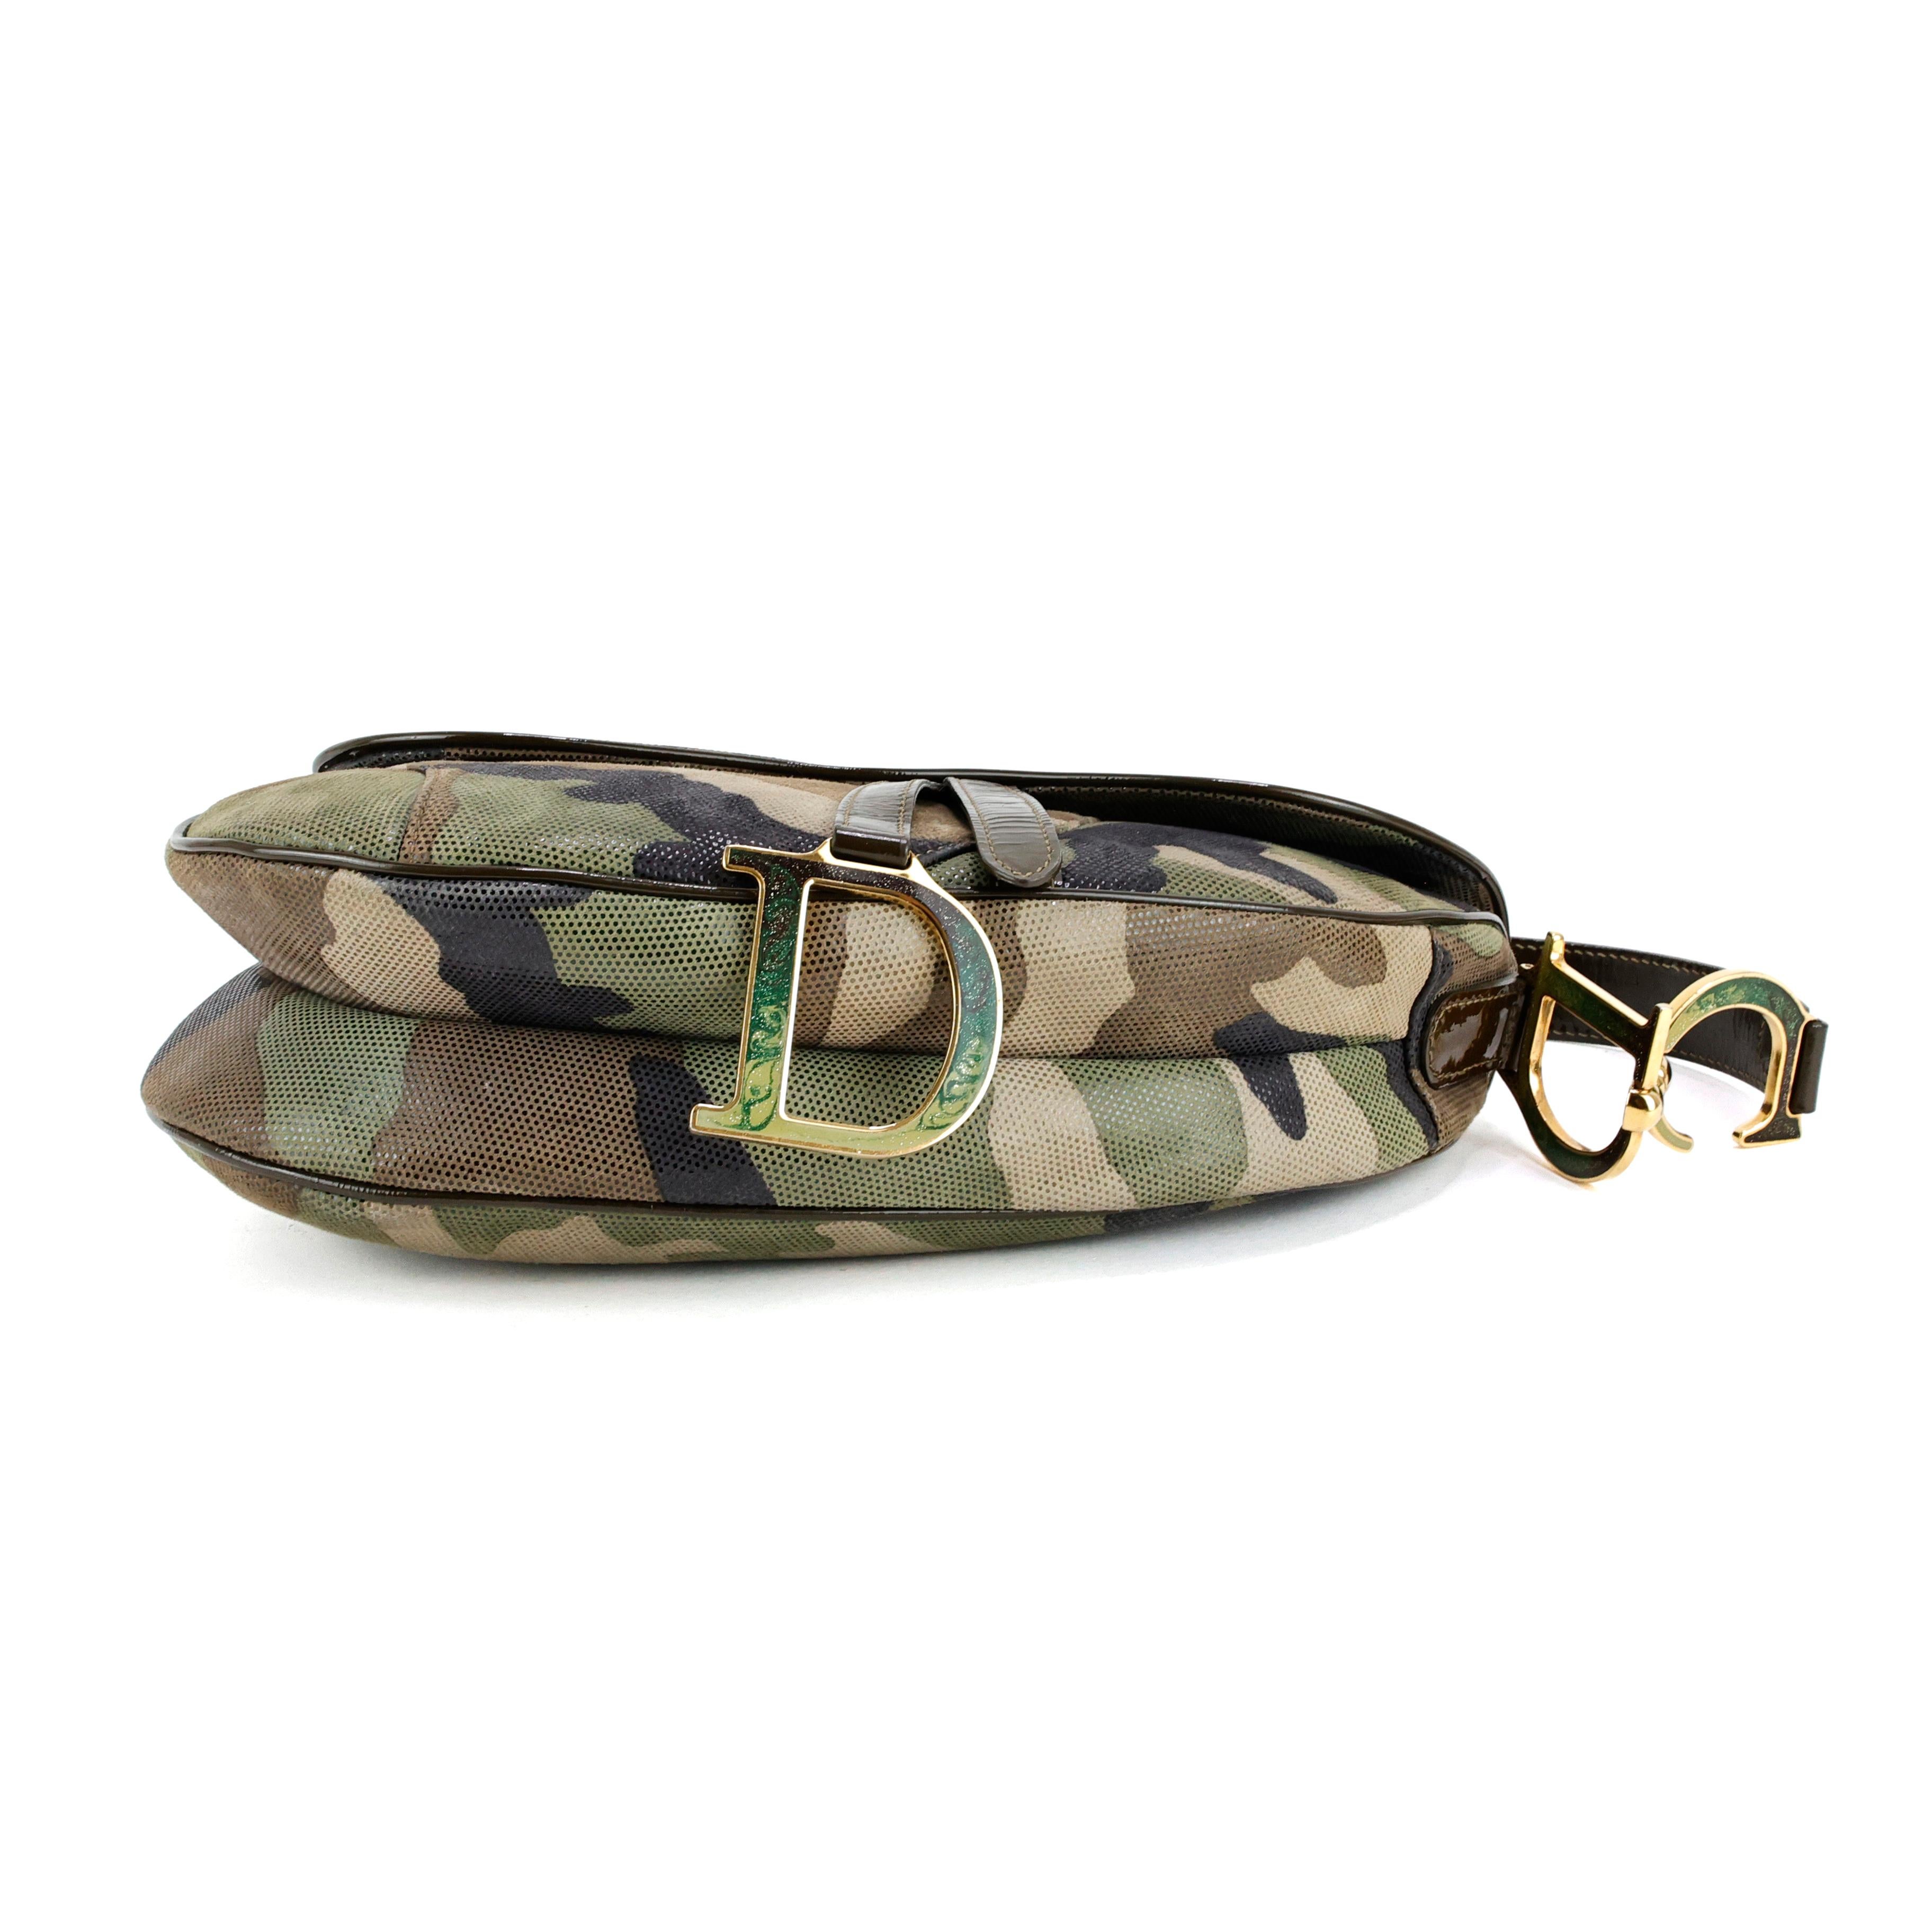 Christian Dior by John Galliano 2000s Camouflage Saddle bag For Sale 1